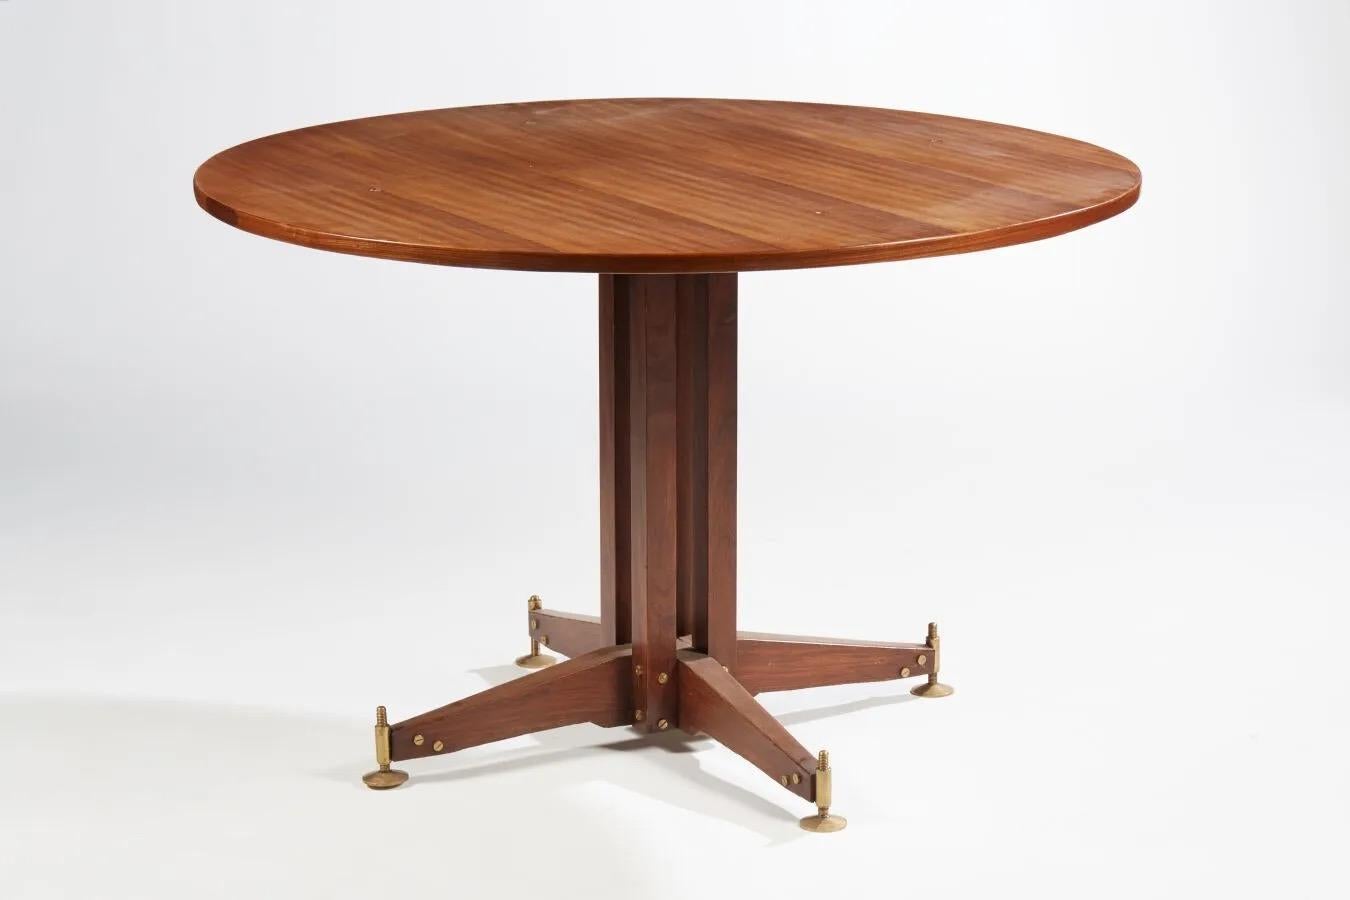 Circular dining table made of rosewood
Italian production, 1960

Brass screw on the legs to adjust the height